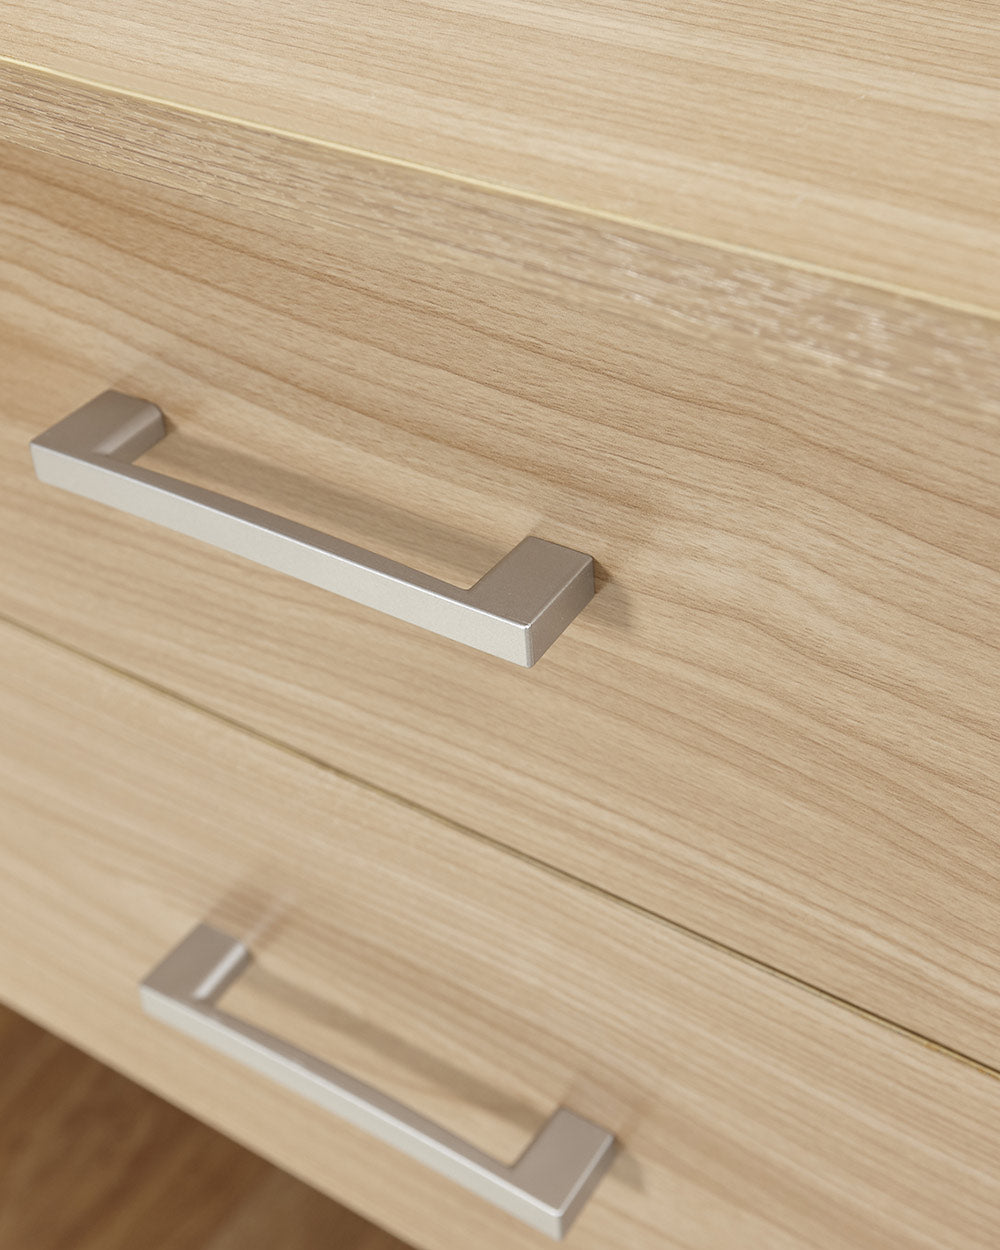 panama oak effect home office desk in a lifestyle image close up of the handles